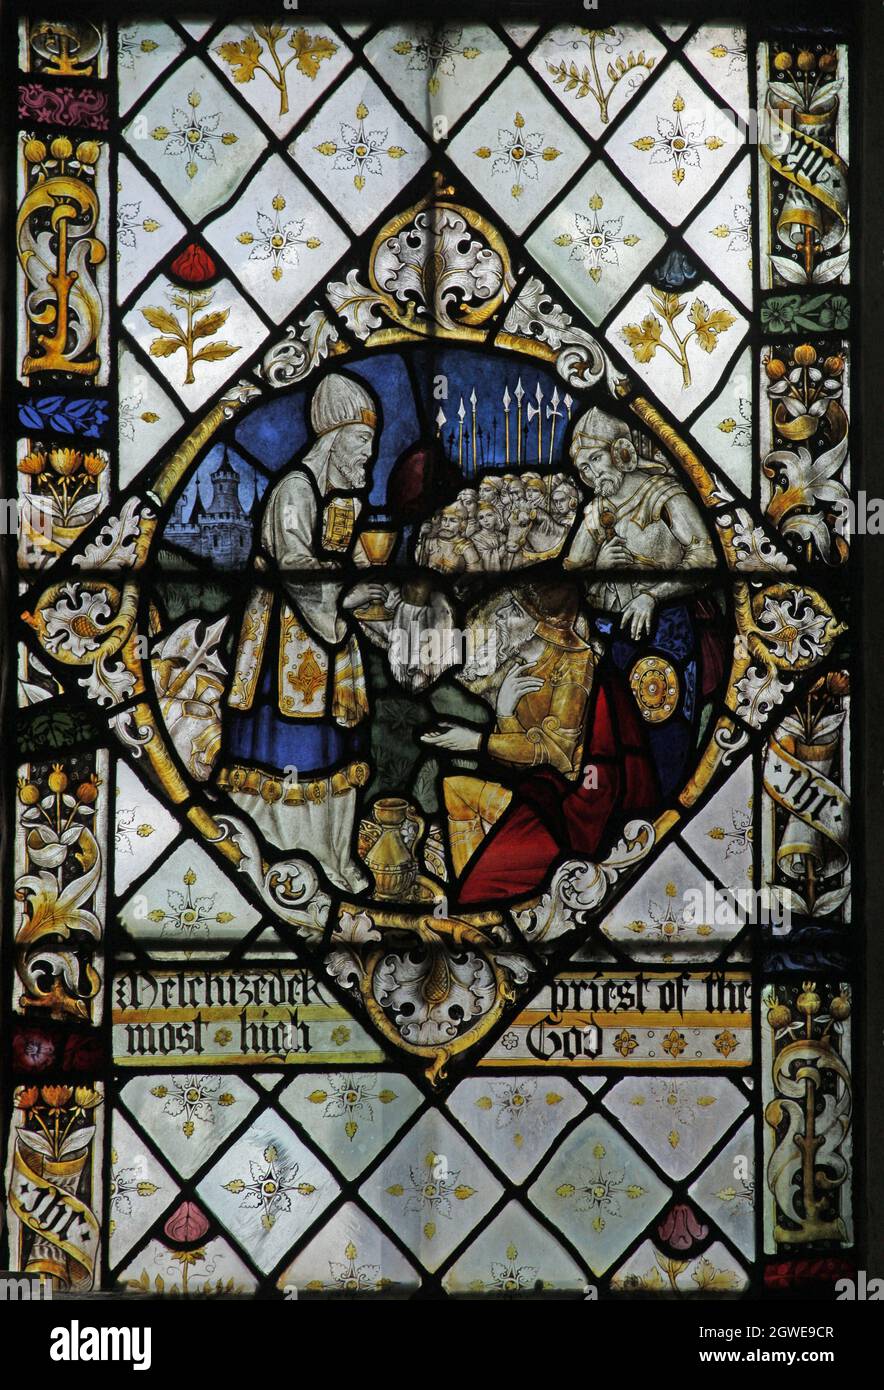 Detail of a stained glass window by Frederick Charles Eden (1864-1944) depicting Melchizedek, Church of St Peter and St Paul, Steeple Aston, Oxfordshi Stock Photo